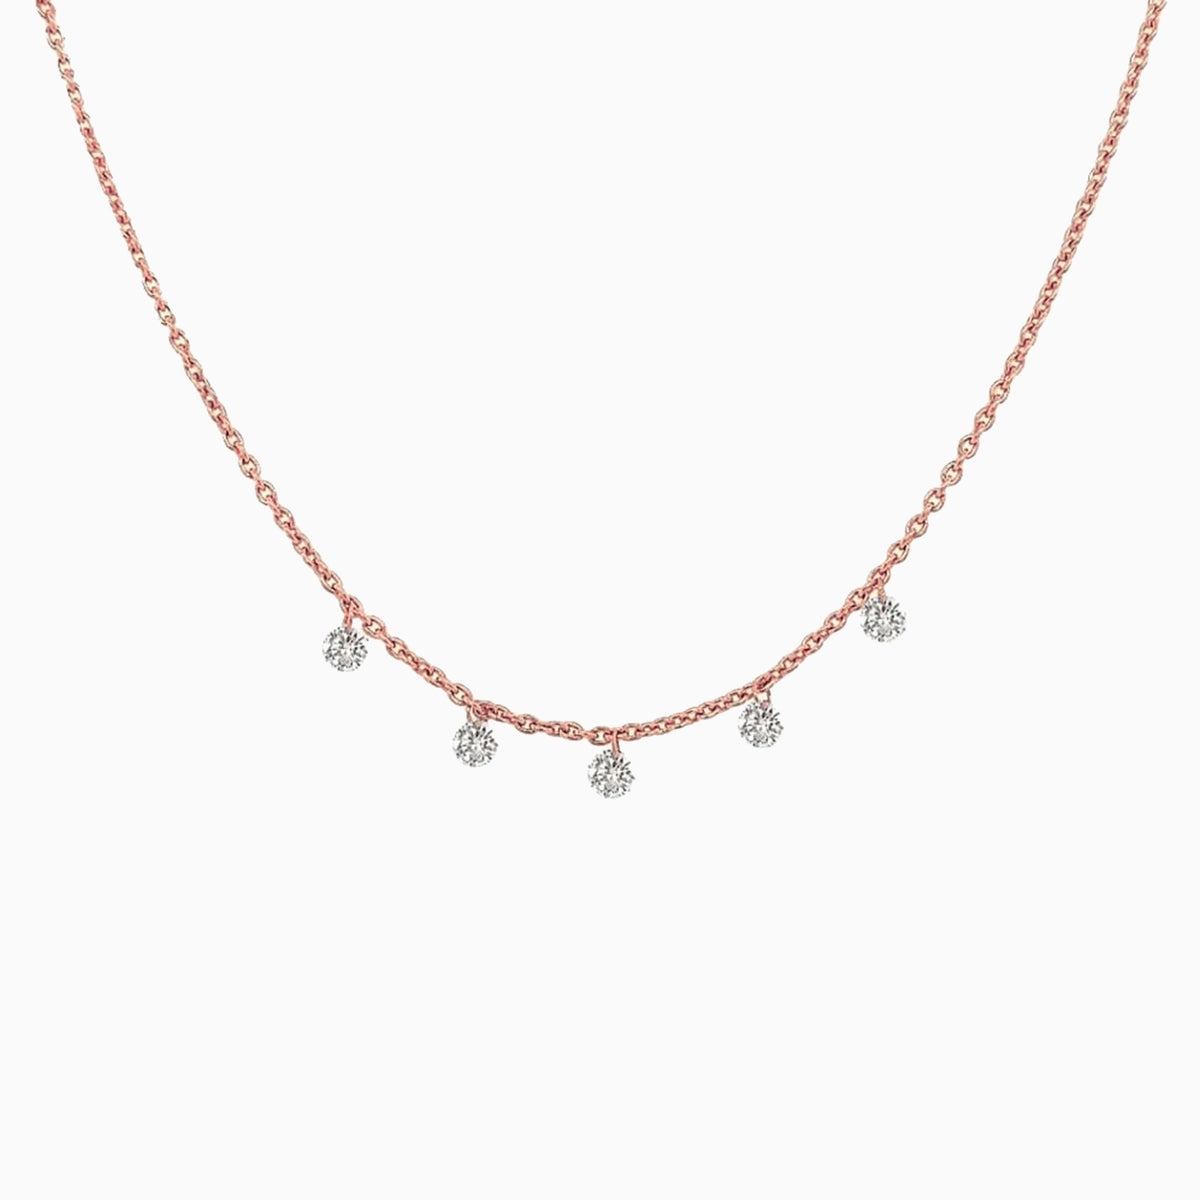 Floating Five Diamond Necklace in Rose Gold